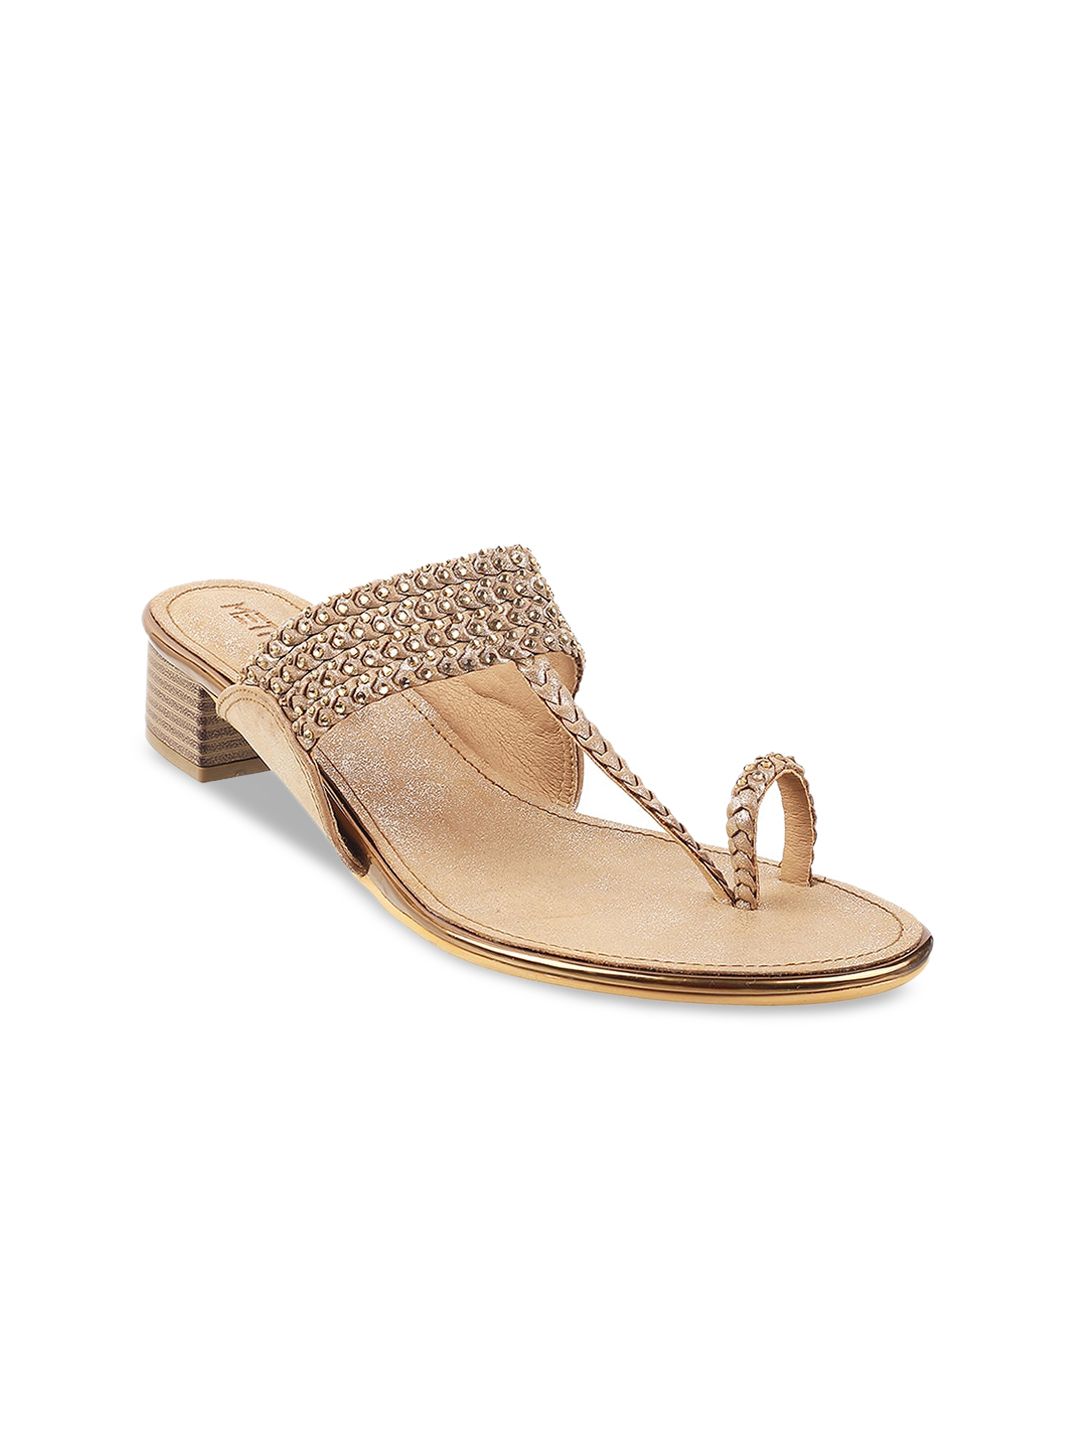 Metro Gold-Toned Embellished Block Sandals Price in India